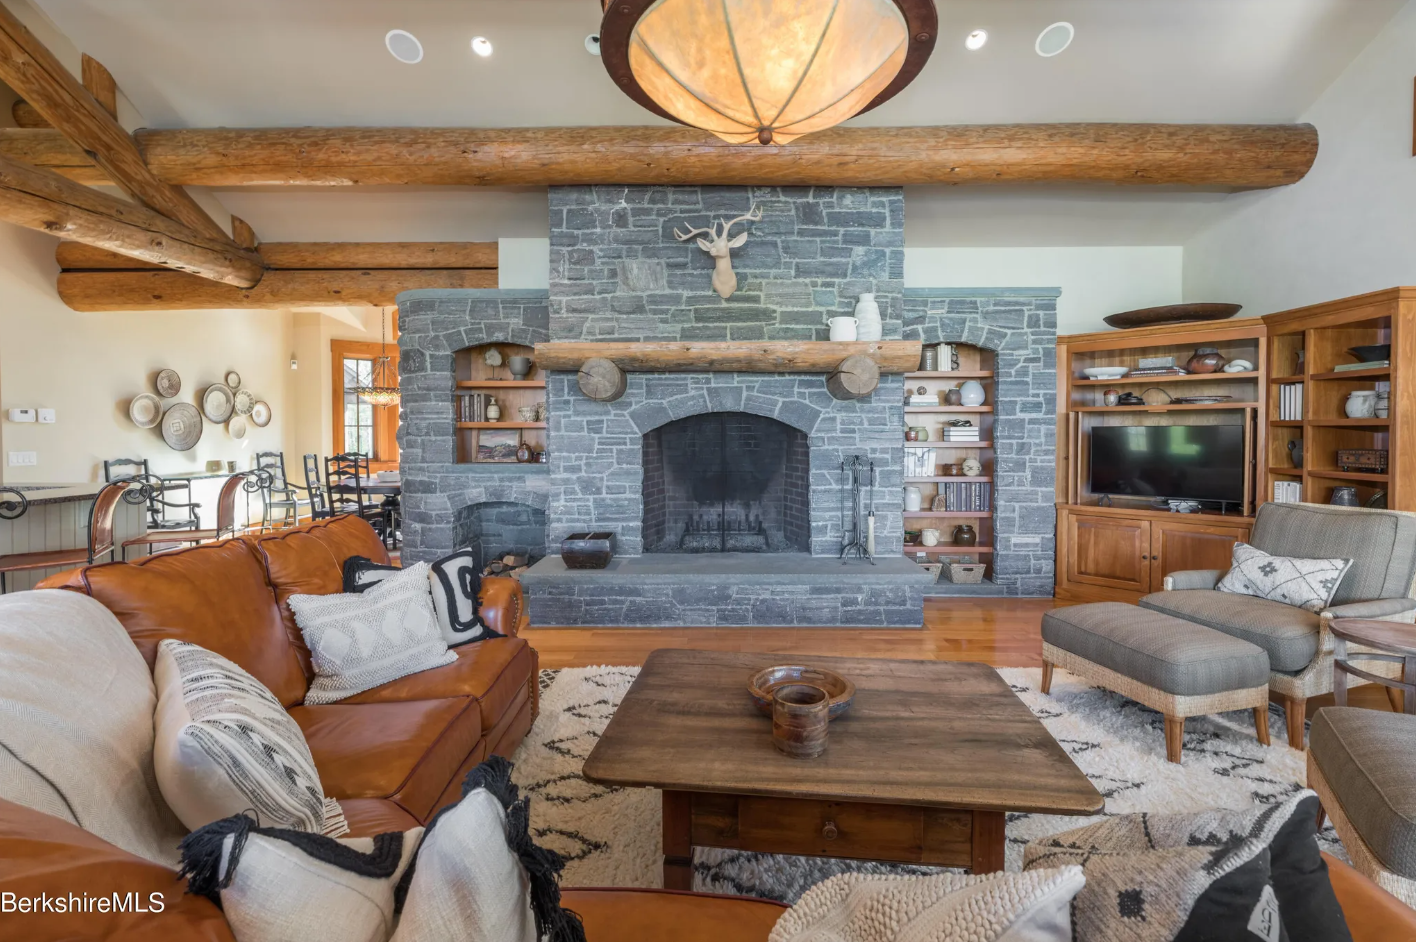 Living room with stone-clad fireplace, hardwood floors and vaulted ceilings with exposed wood beams.